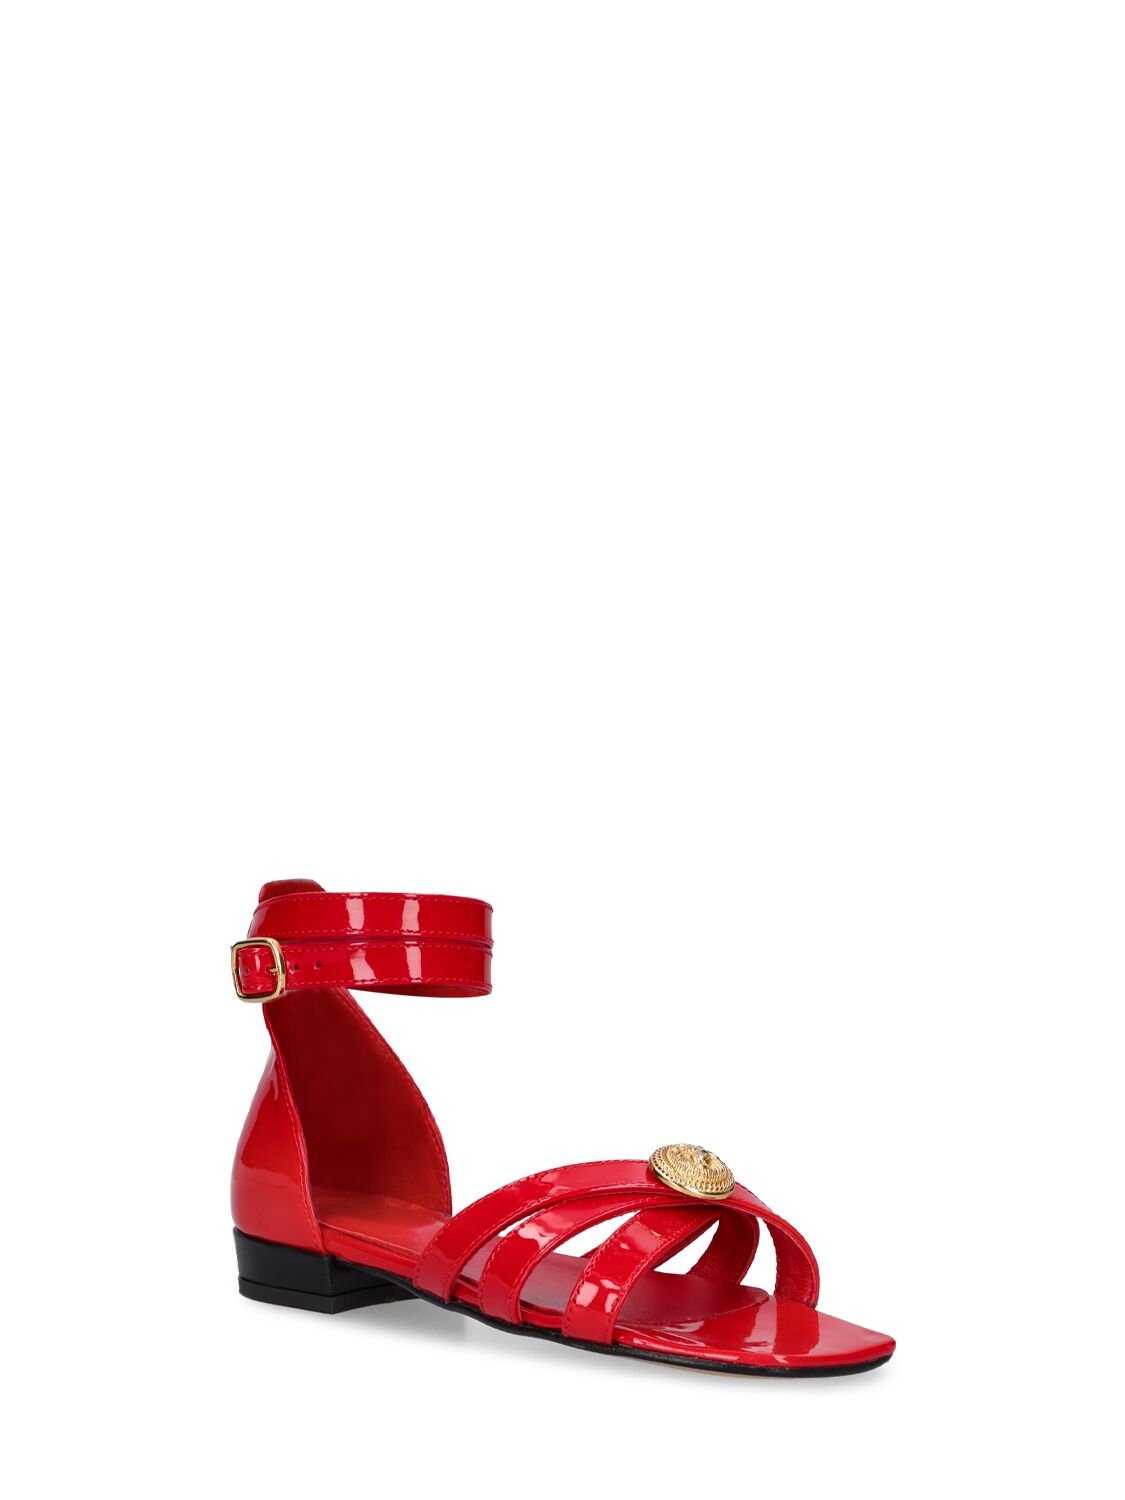 Shop Balmain Painted Leather Sandals In Red